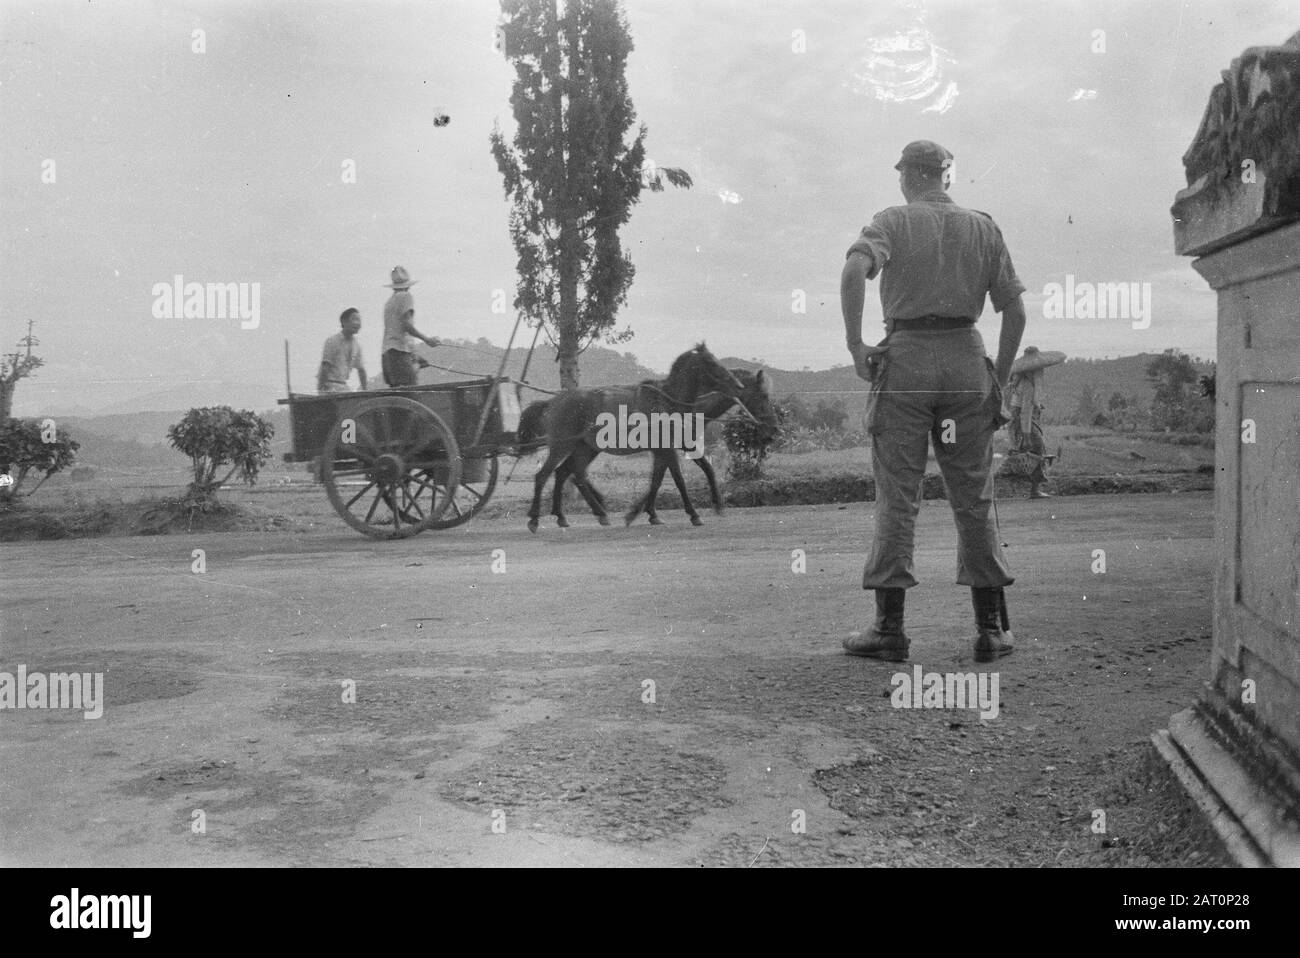 [A dokar (horse with cart) passes. In the foreground an imminent Dutch military] Location: Indonesia, Dutch East Indies Stock Photo